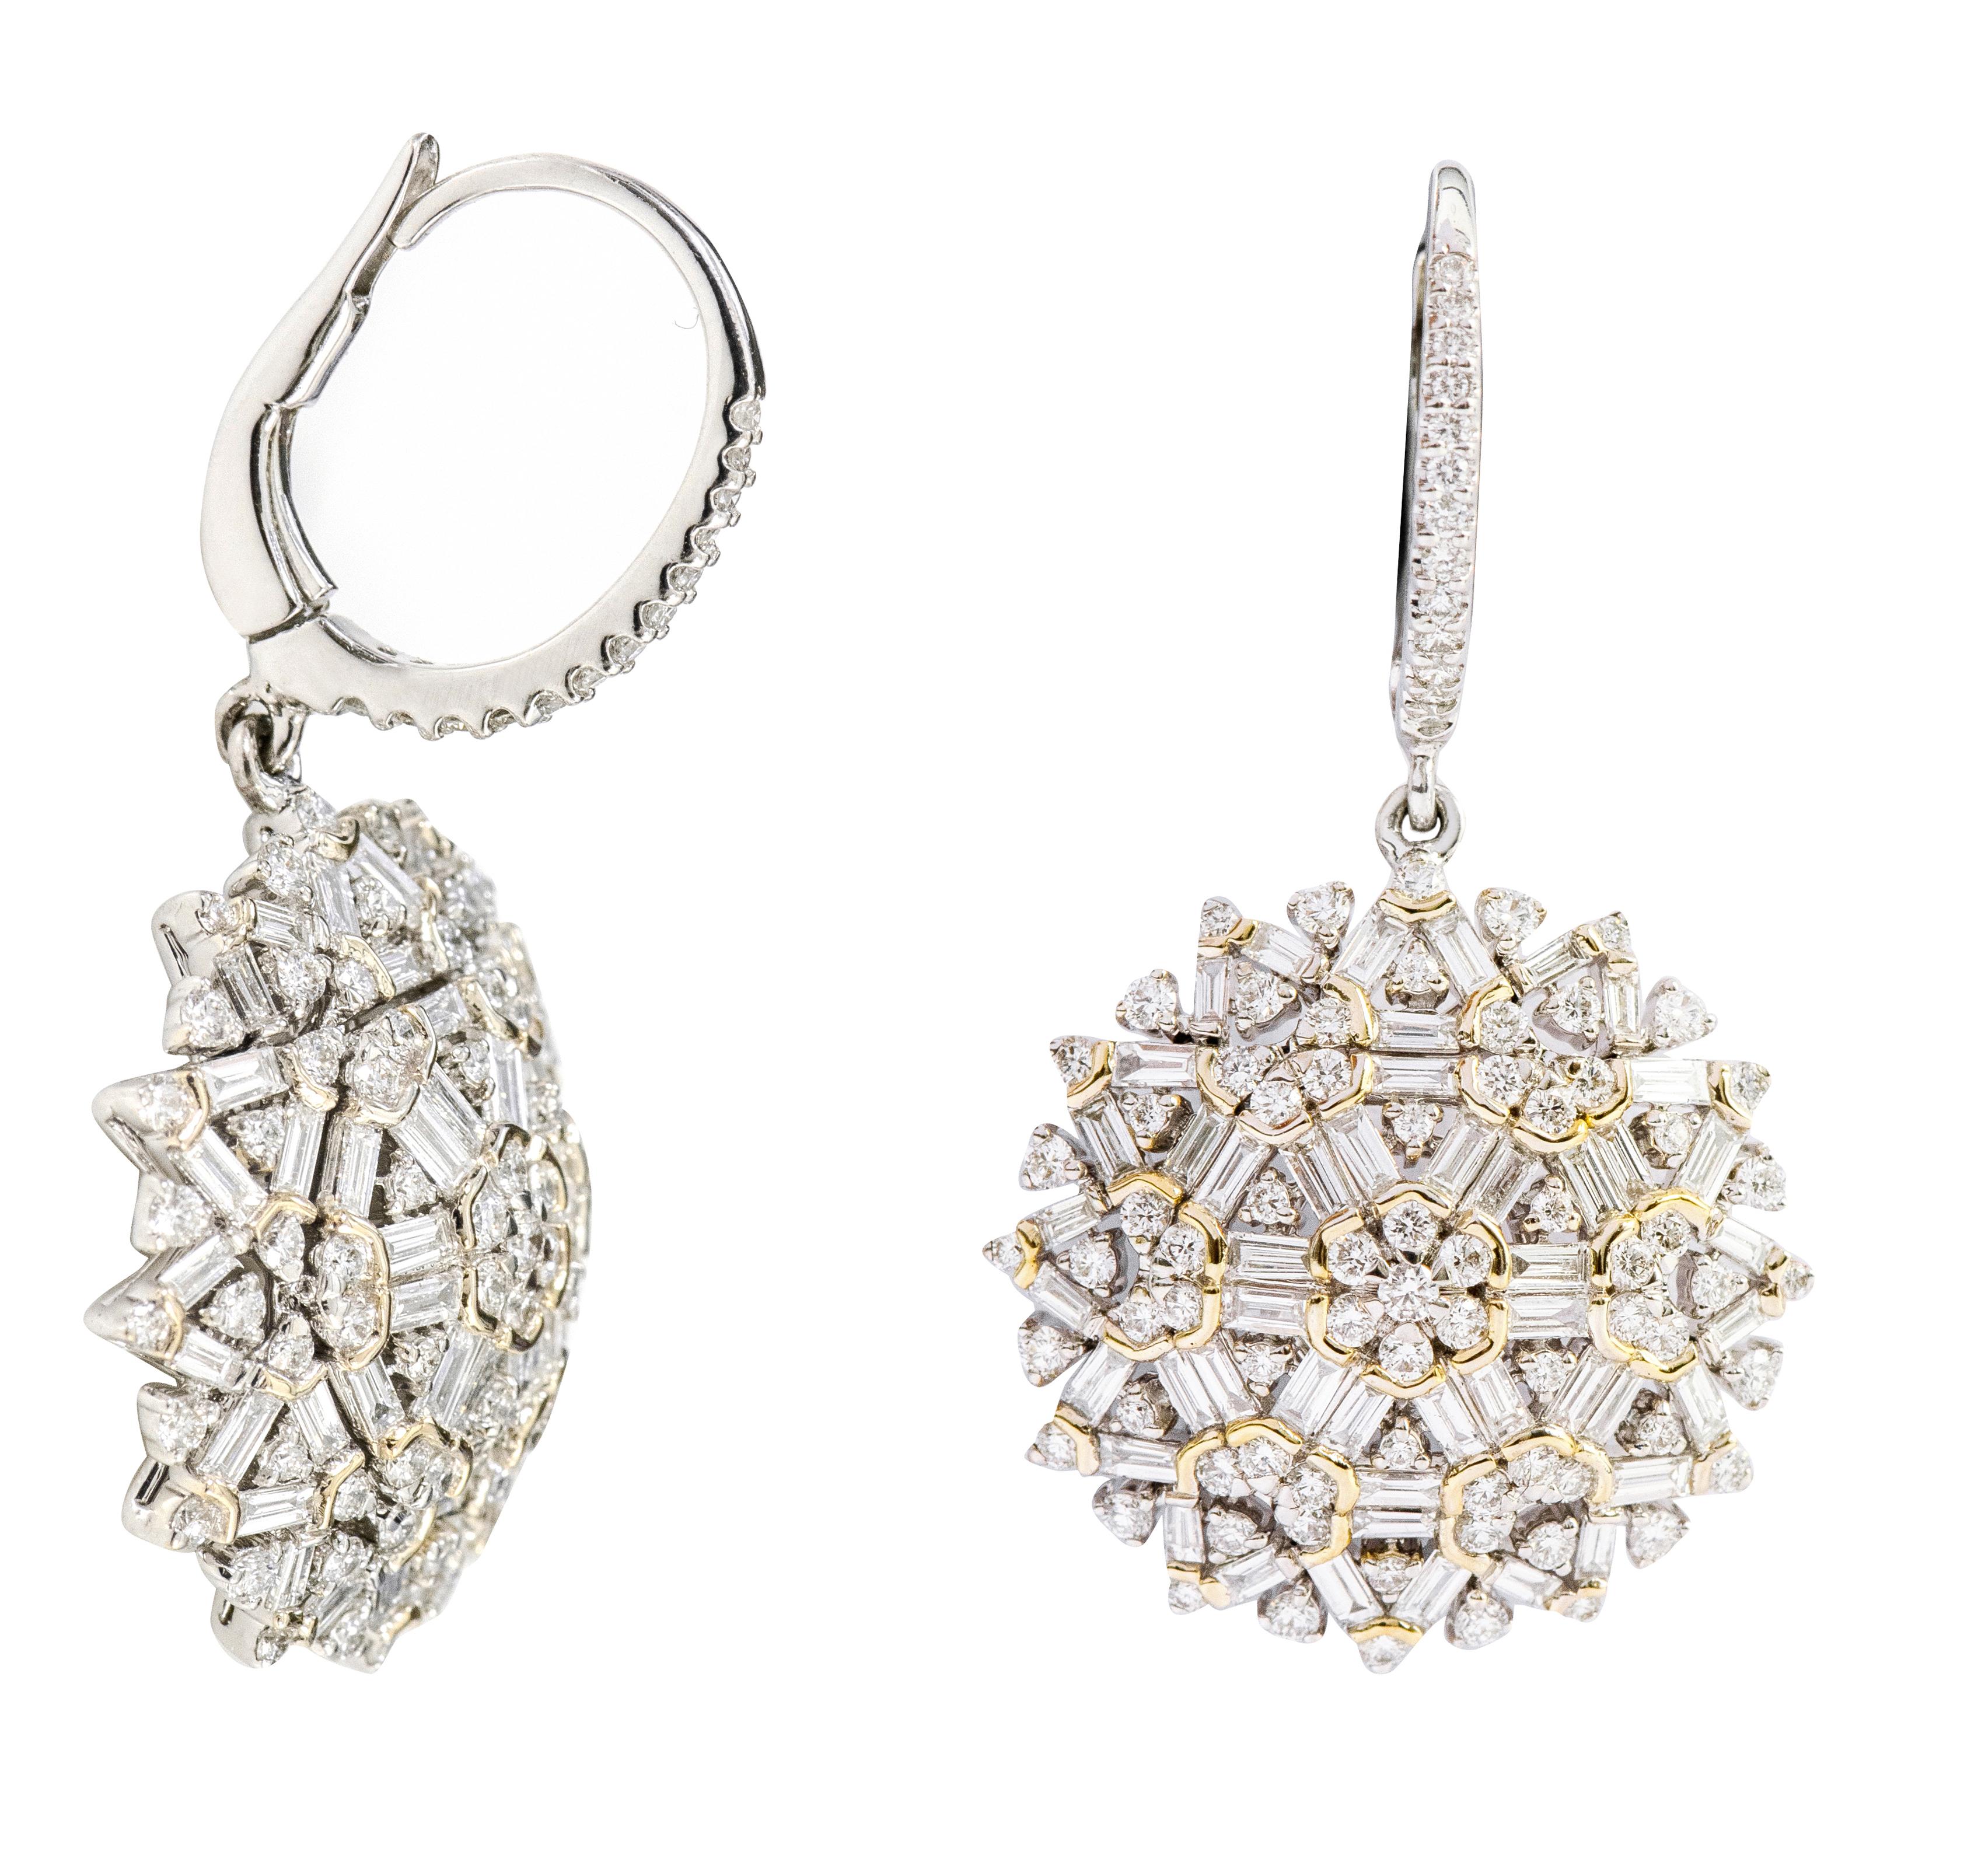 18 Karat Gold 2.75 Carat Diamond Dangle Earrings

This fascinating mix shape diamond floral earring pair is incredible. It’s a sophisticated and very intricate design setting wherein the first layer is formed with 7 identical round diamonds,